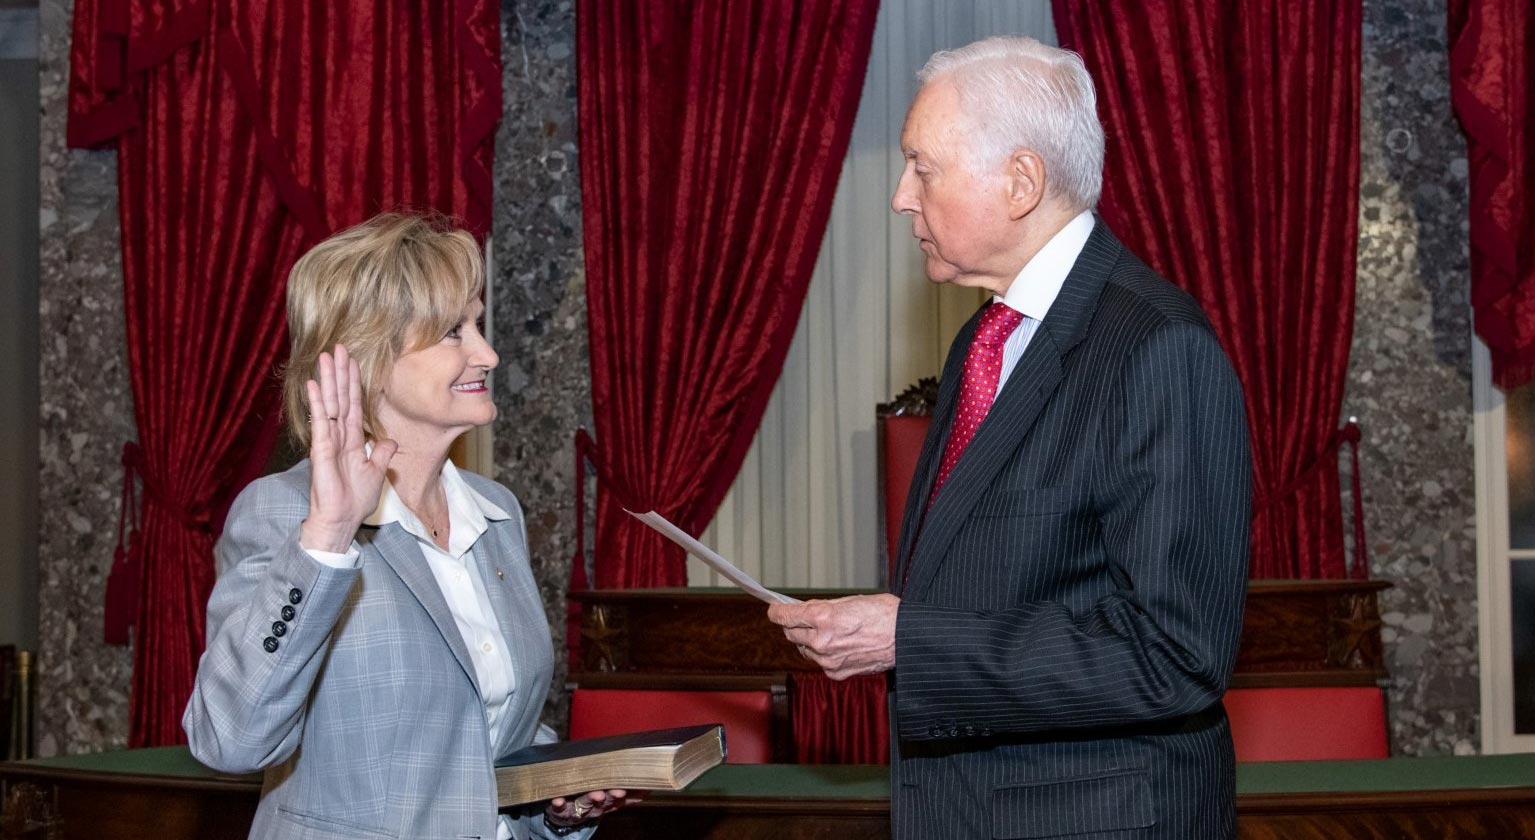 Senator Hyde-Smith takes the oath of office after being elected the first woman to represent Mississippi in Congress